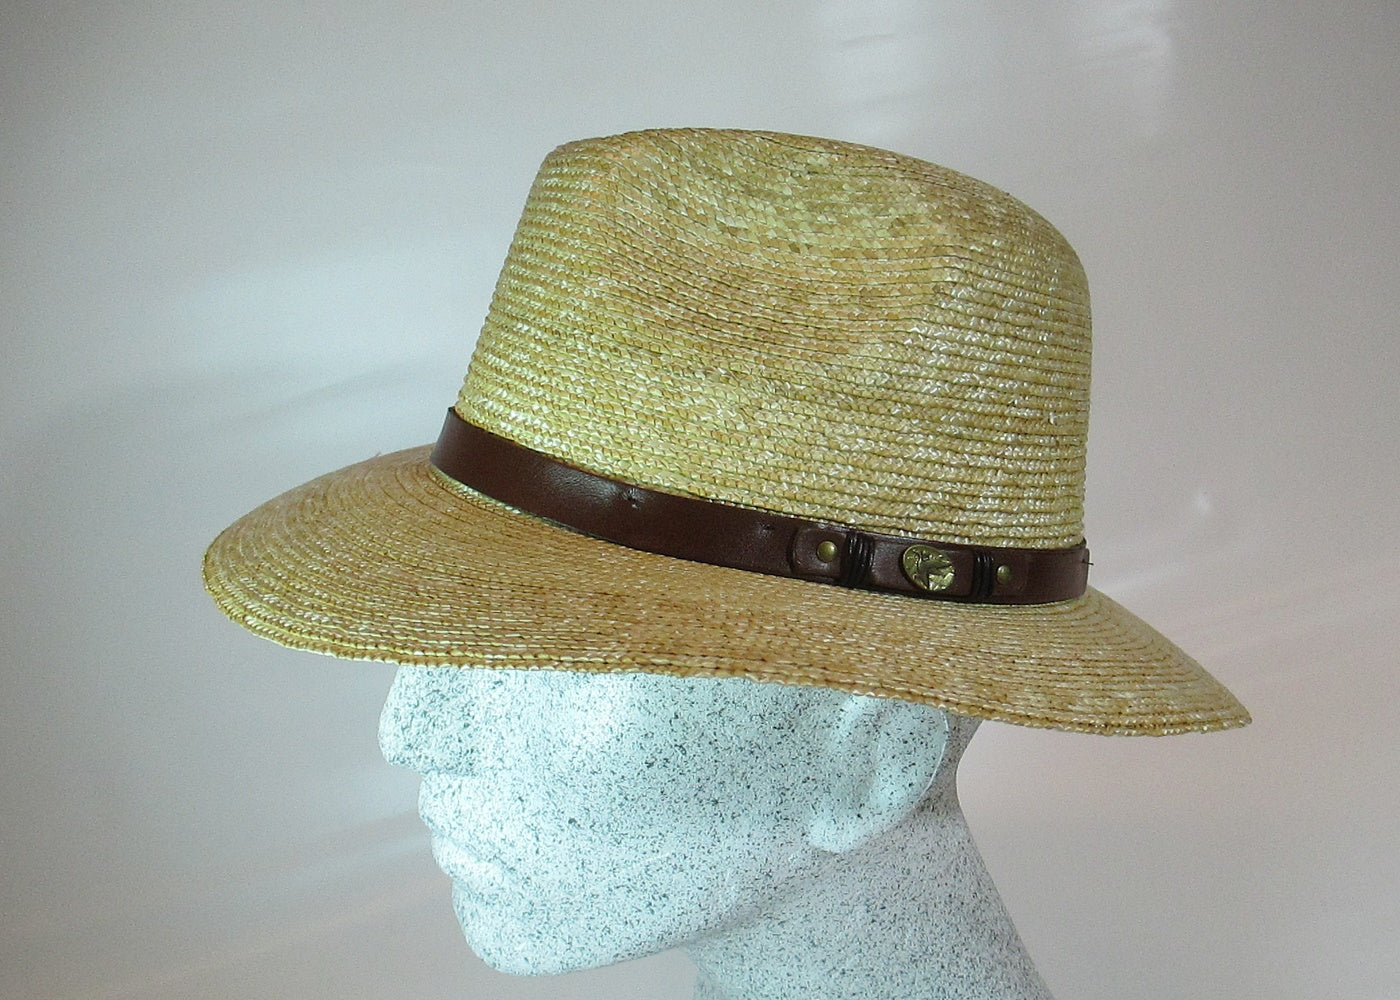 Braided straw hat natural with leather strap